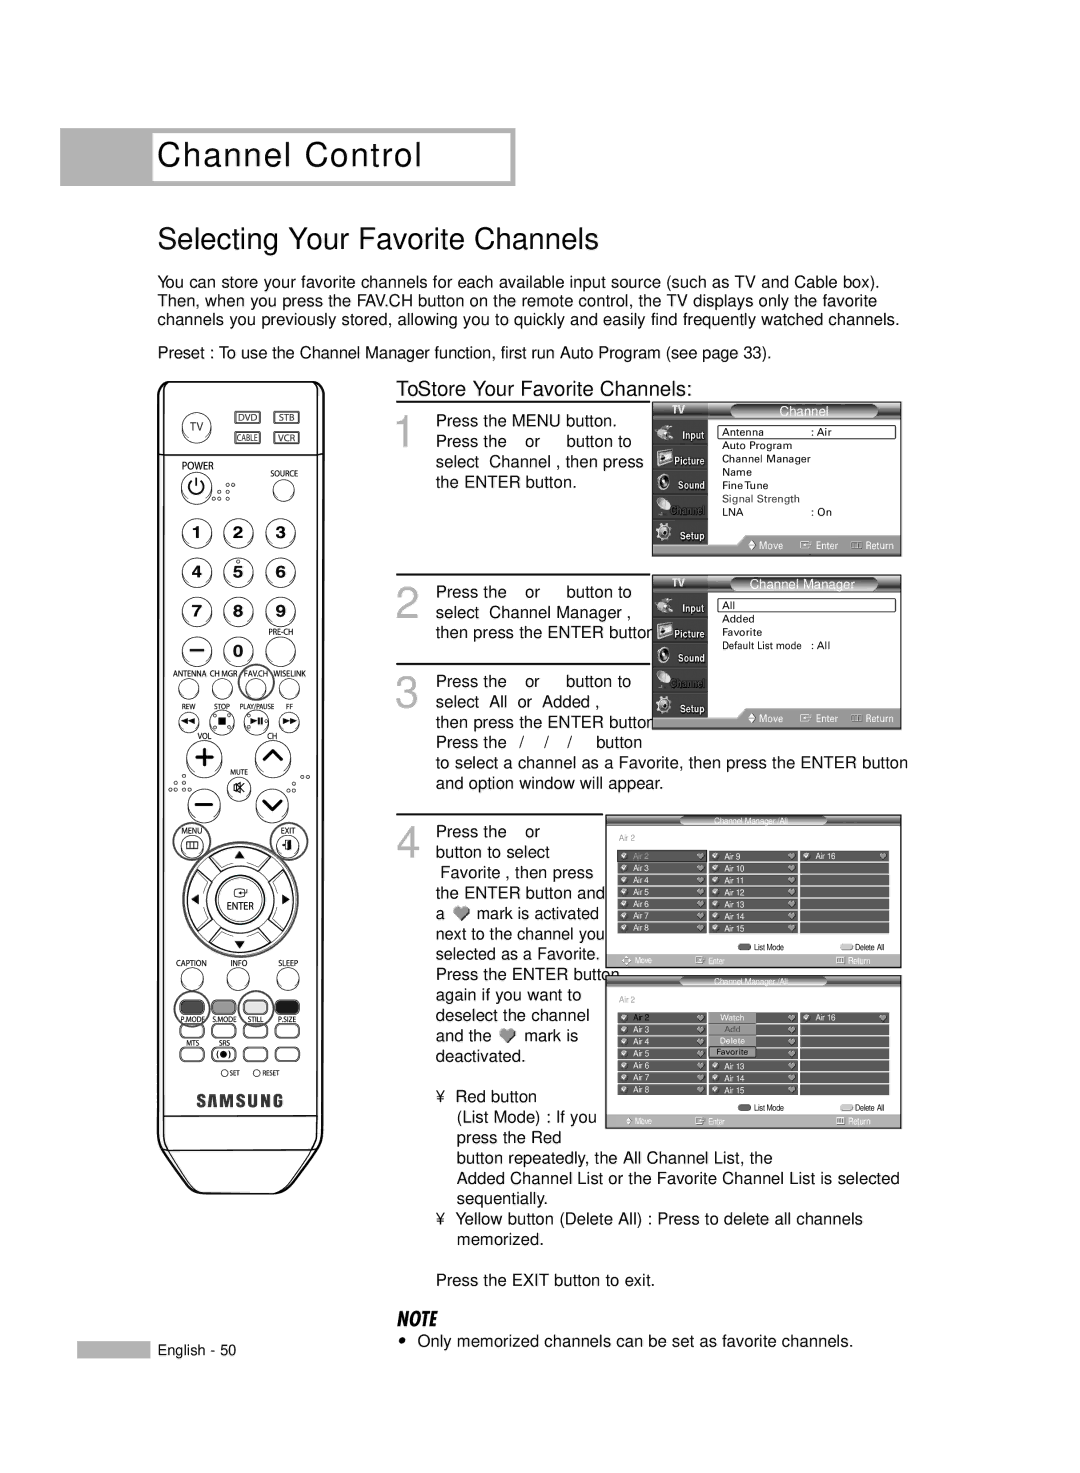 Samsung HL-S4676S manual Channel Control, Selecting Your Favorite Channels 